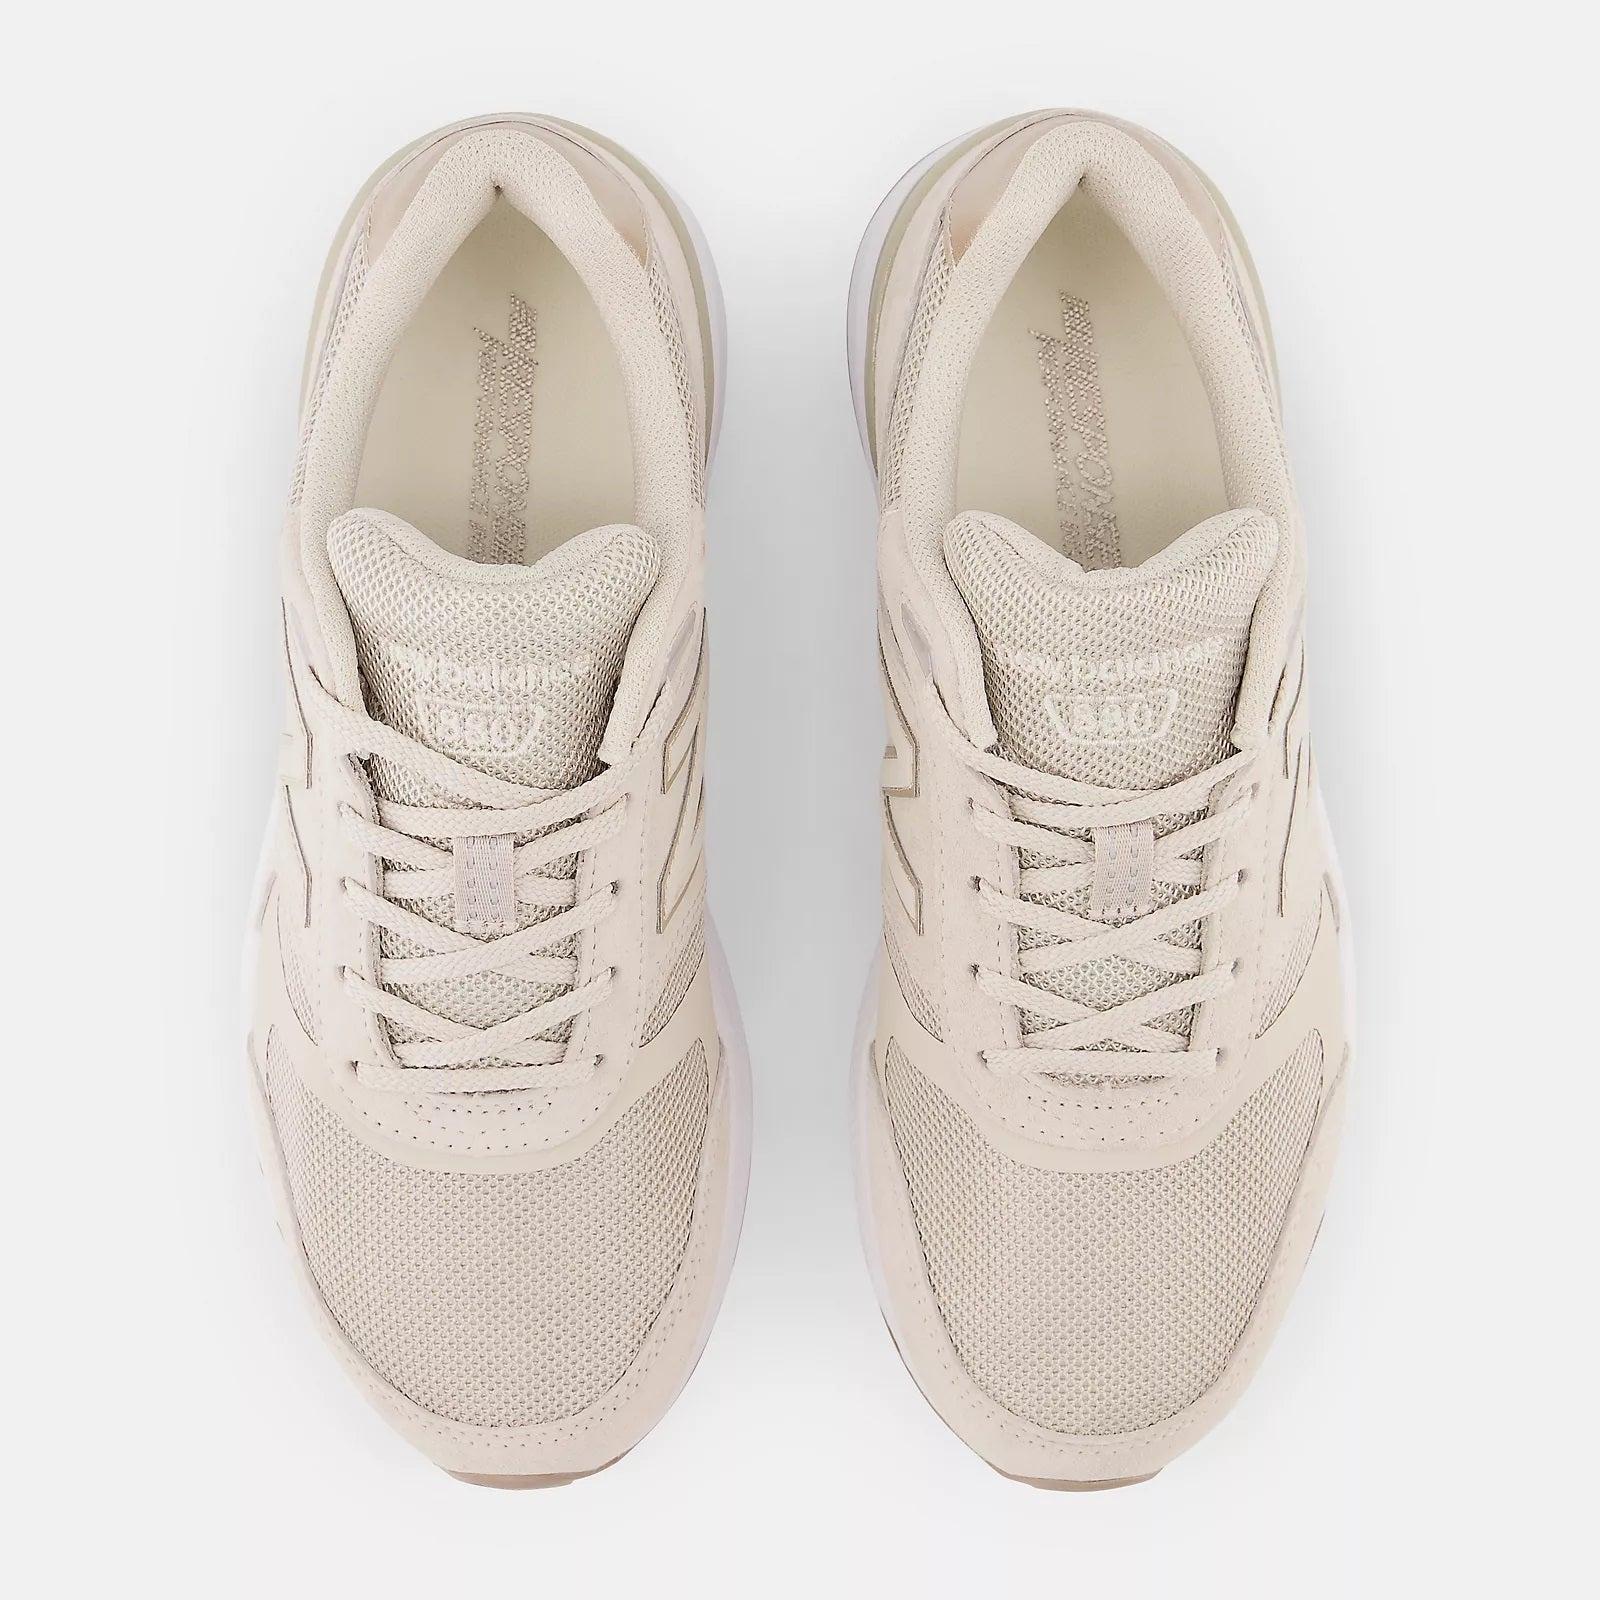 New Balance S Wide Fit Ww880 Walking Trainers in White | Lyst